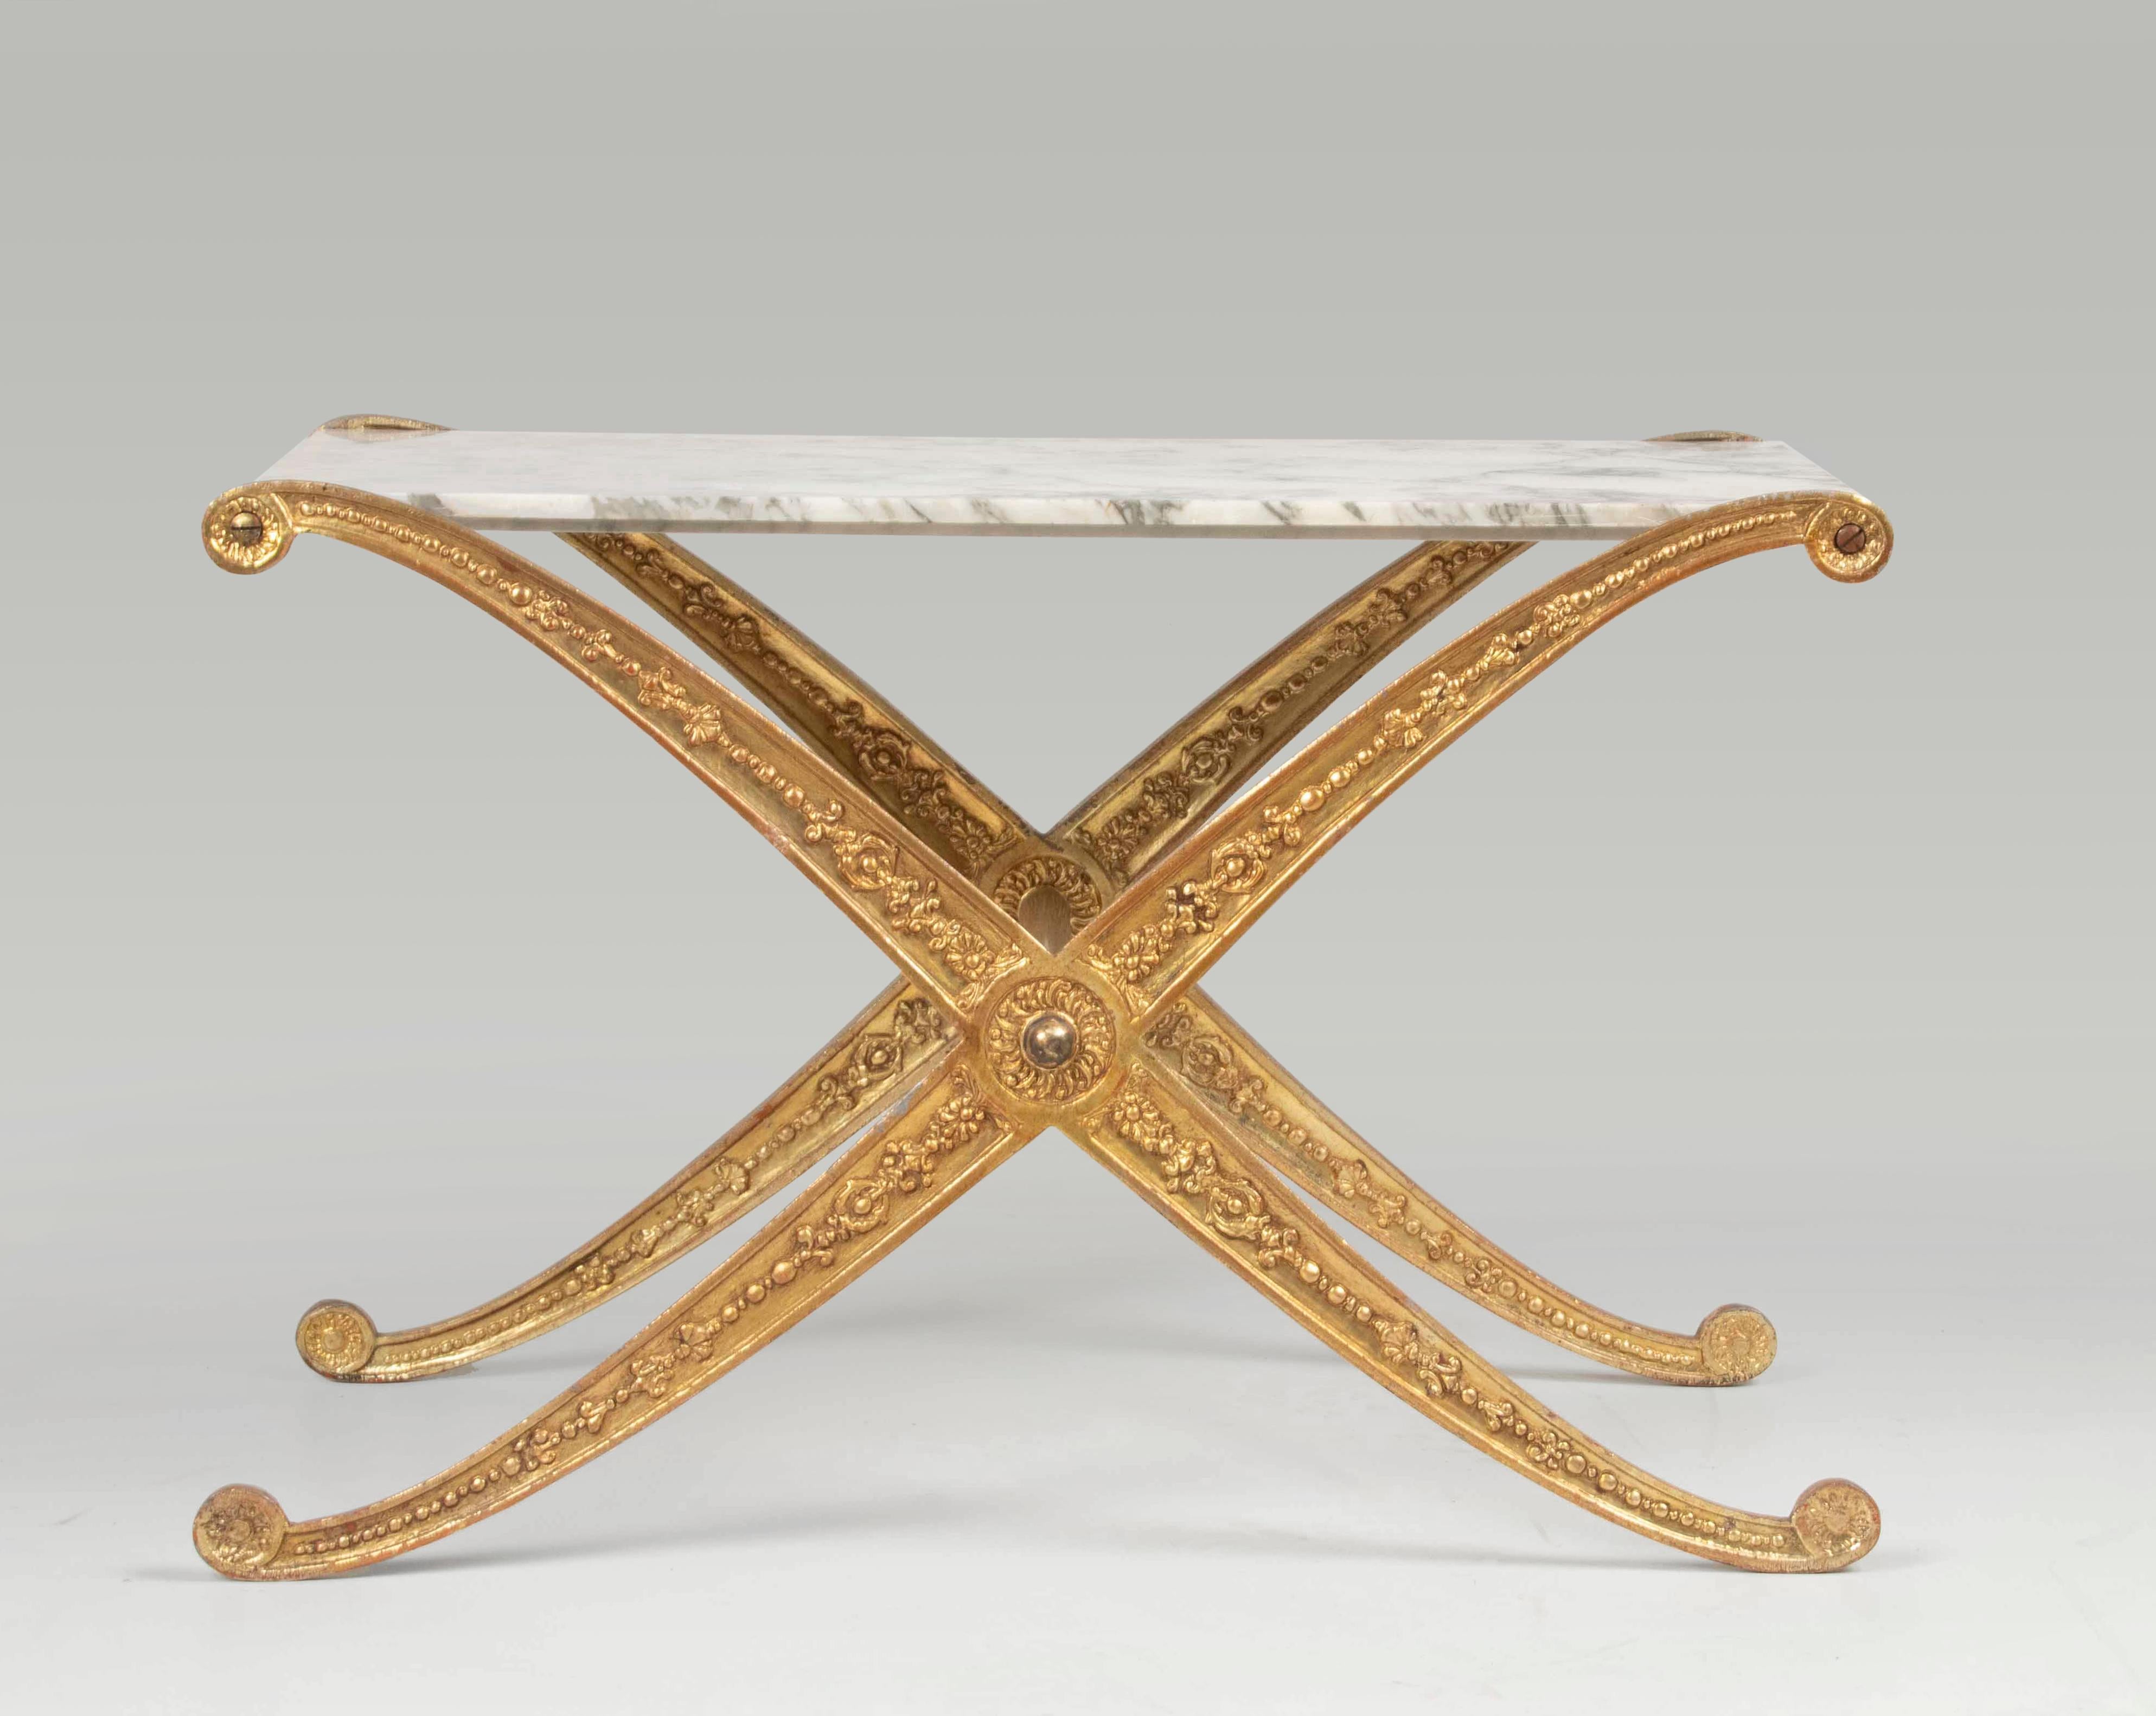 Beautiful vintage side table by the Italian maker Palladio. The base is made of cast iron, patinated in a gold color. Also known as 'Curule', this cross-legged model has its origins in the Roman Empire.
The top of the table is made of white marble